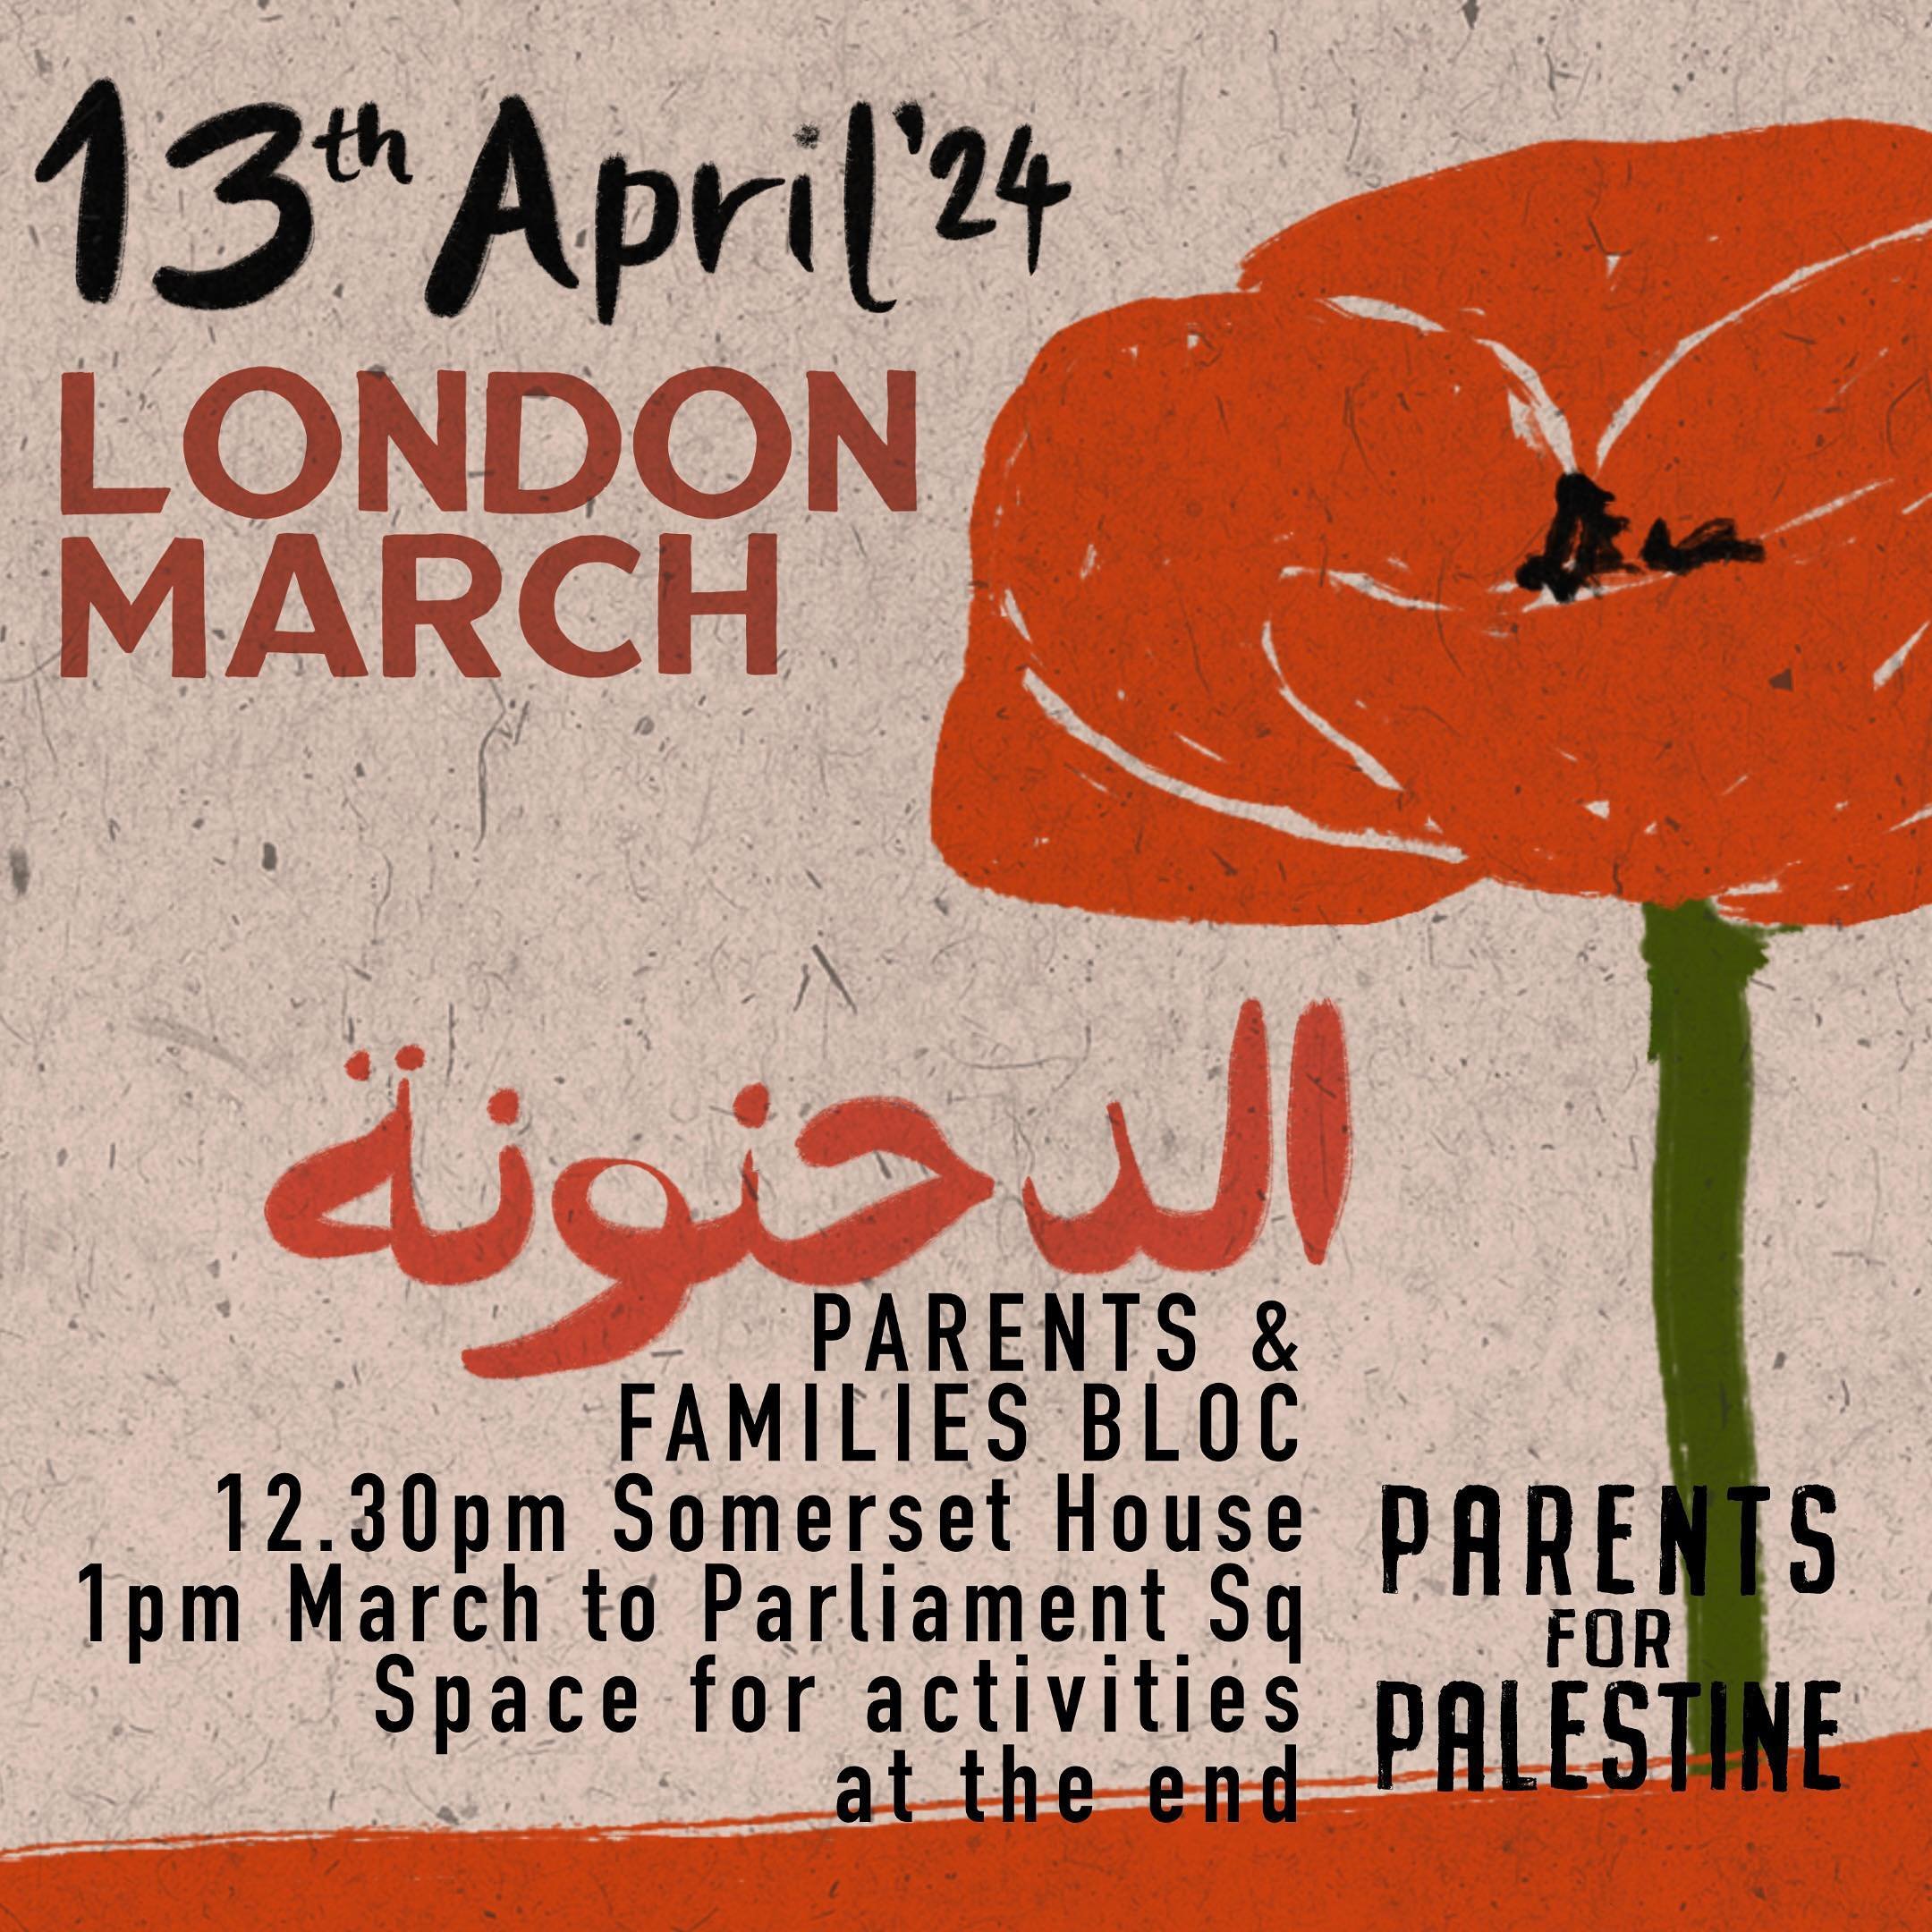 *London March this Sat 13 April*
UPDATE INFO.

✊🏼✊🏽✊🏾✊🏿🍉🍉🍉🍉
March with us to honor the lives lost and to protest the shameful reluctance of our UK government in failing to call for a permanent ceasefire in Palestine.

📍 Meet: outside Somerse